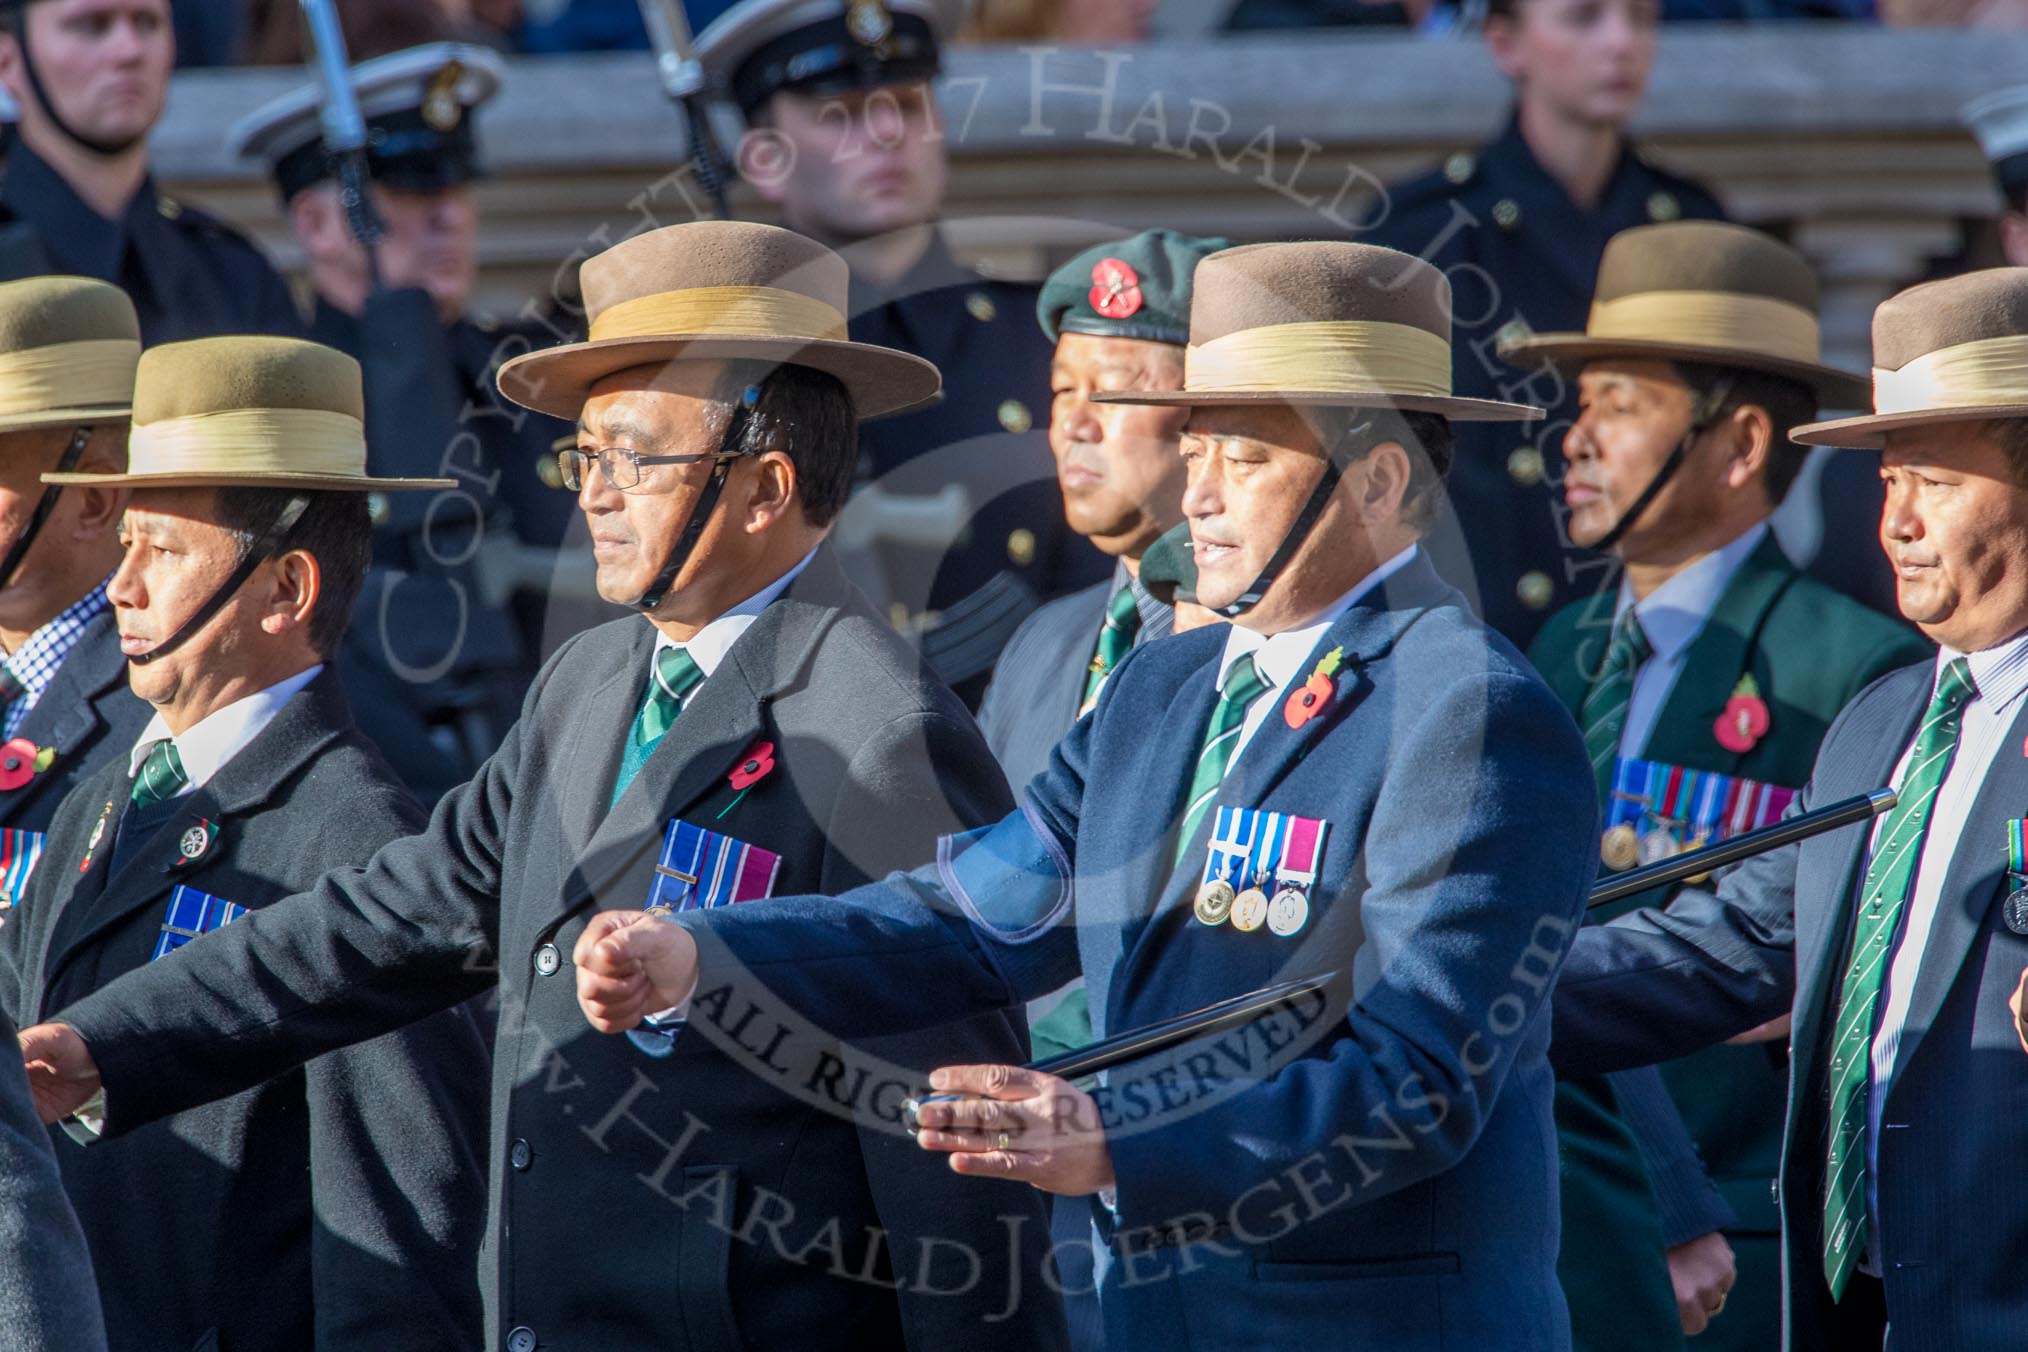 British Gurkha Welfare Society (Group D6, 5 members) during the Royal British Legion March Past on Remembrance Sunday at the Cenotaph, Whitehall, Westminster, London, 11 November 2018, 12:21.